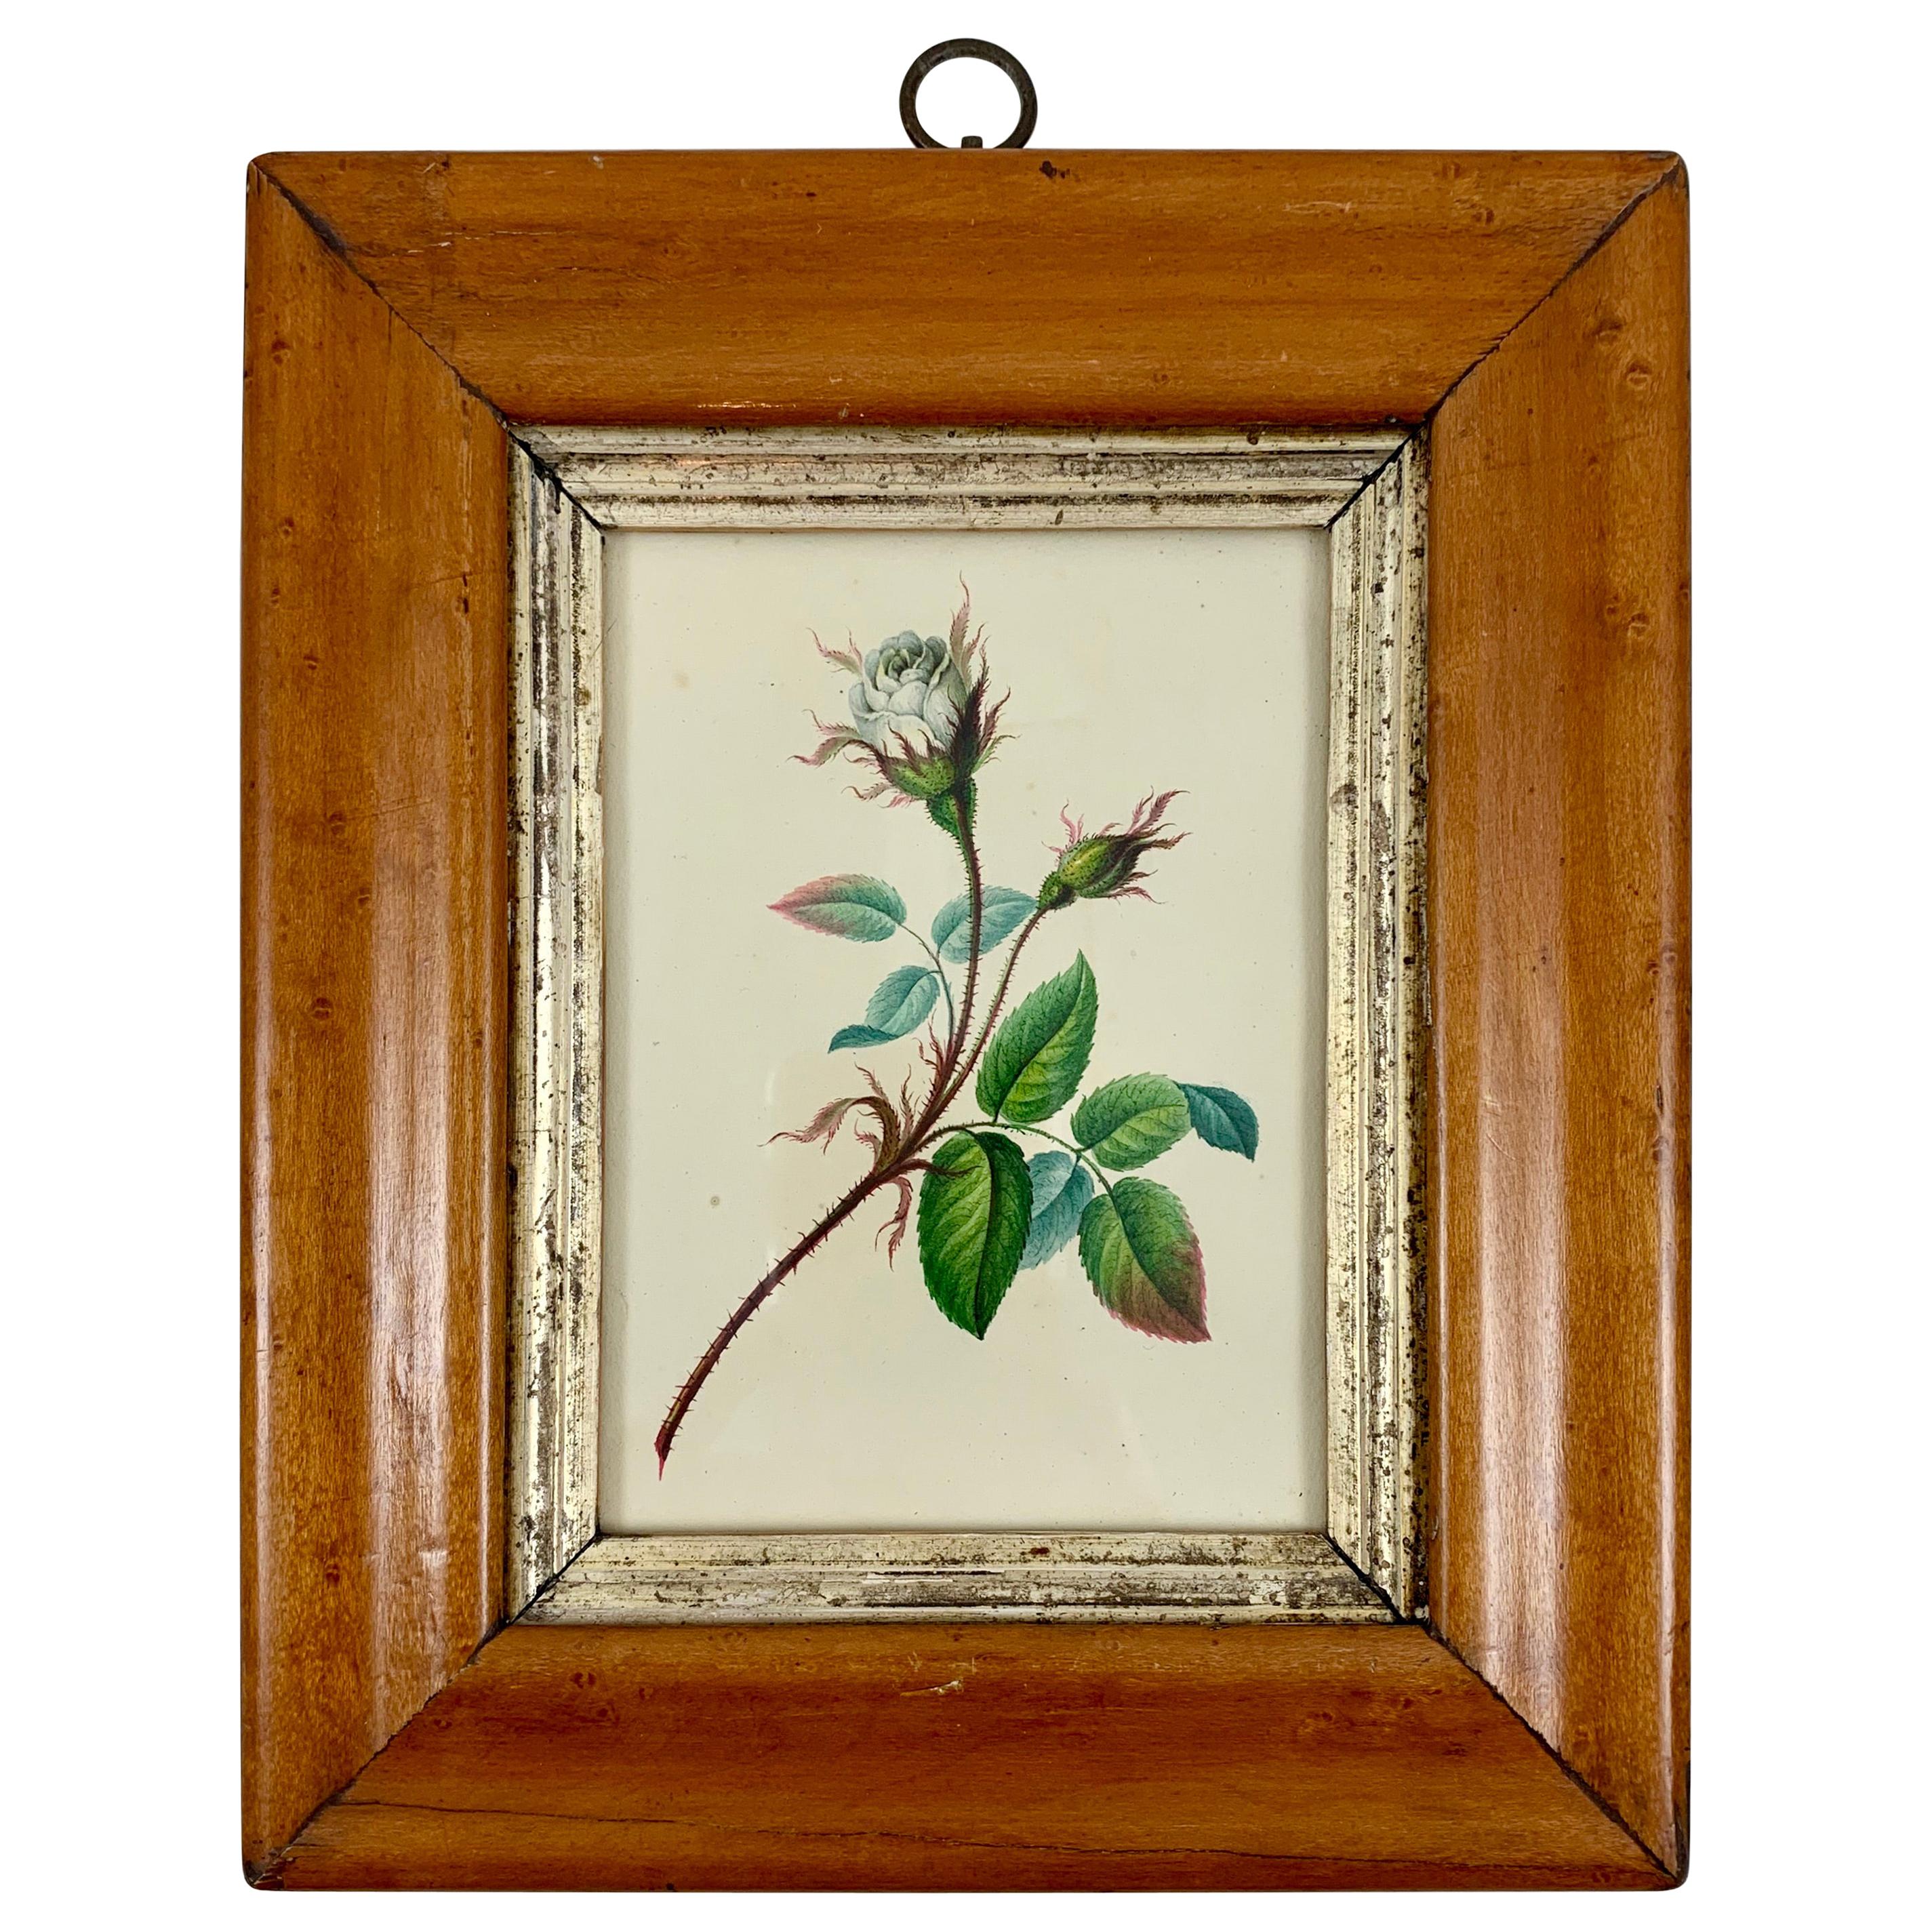 English Regency Period Original Watercolor in Fruitwood Frame, White Hairy Rose